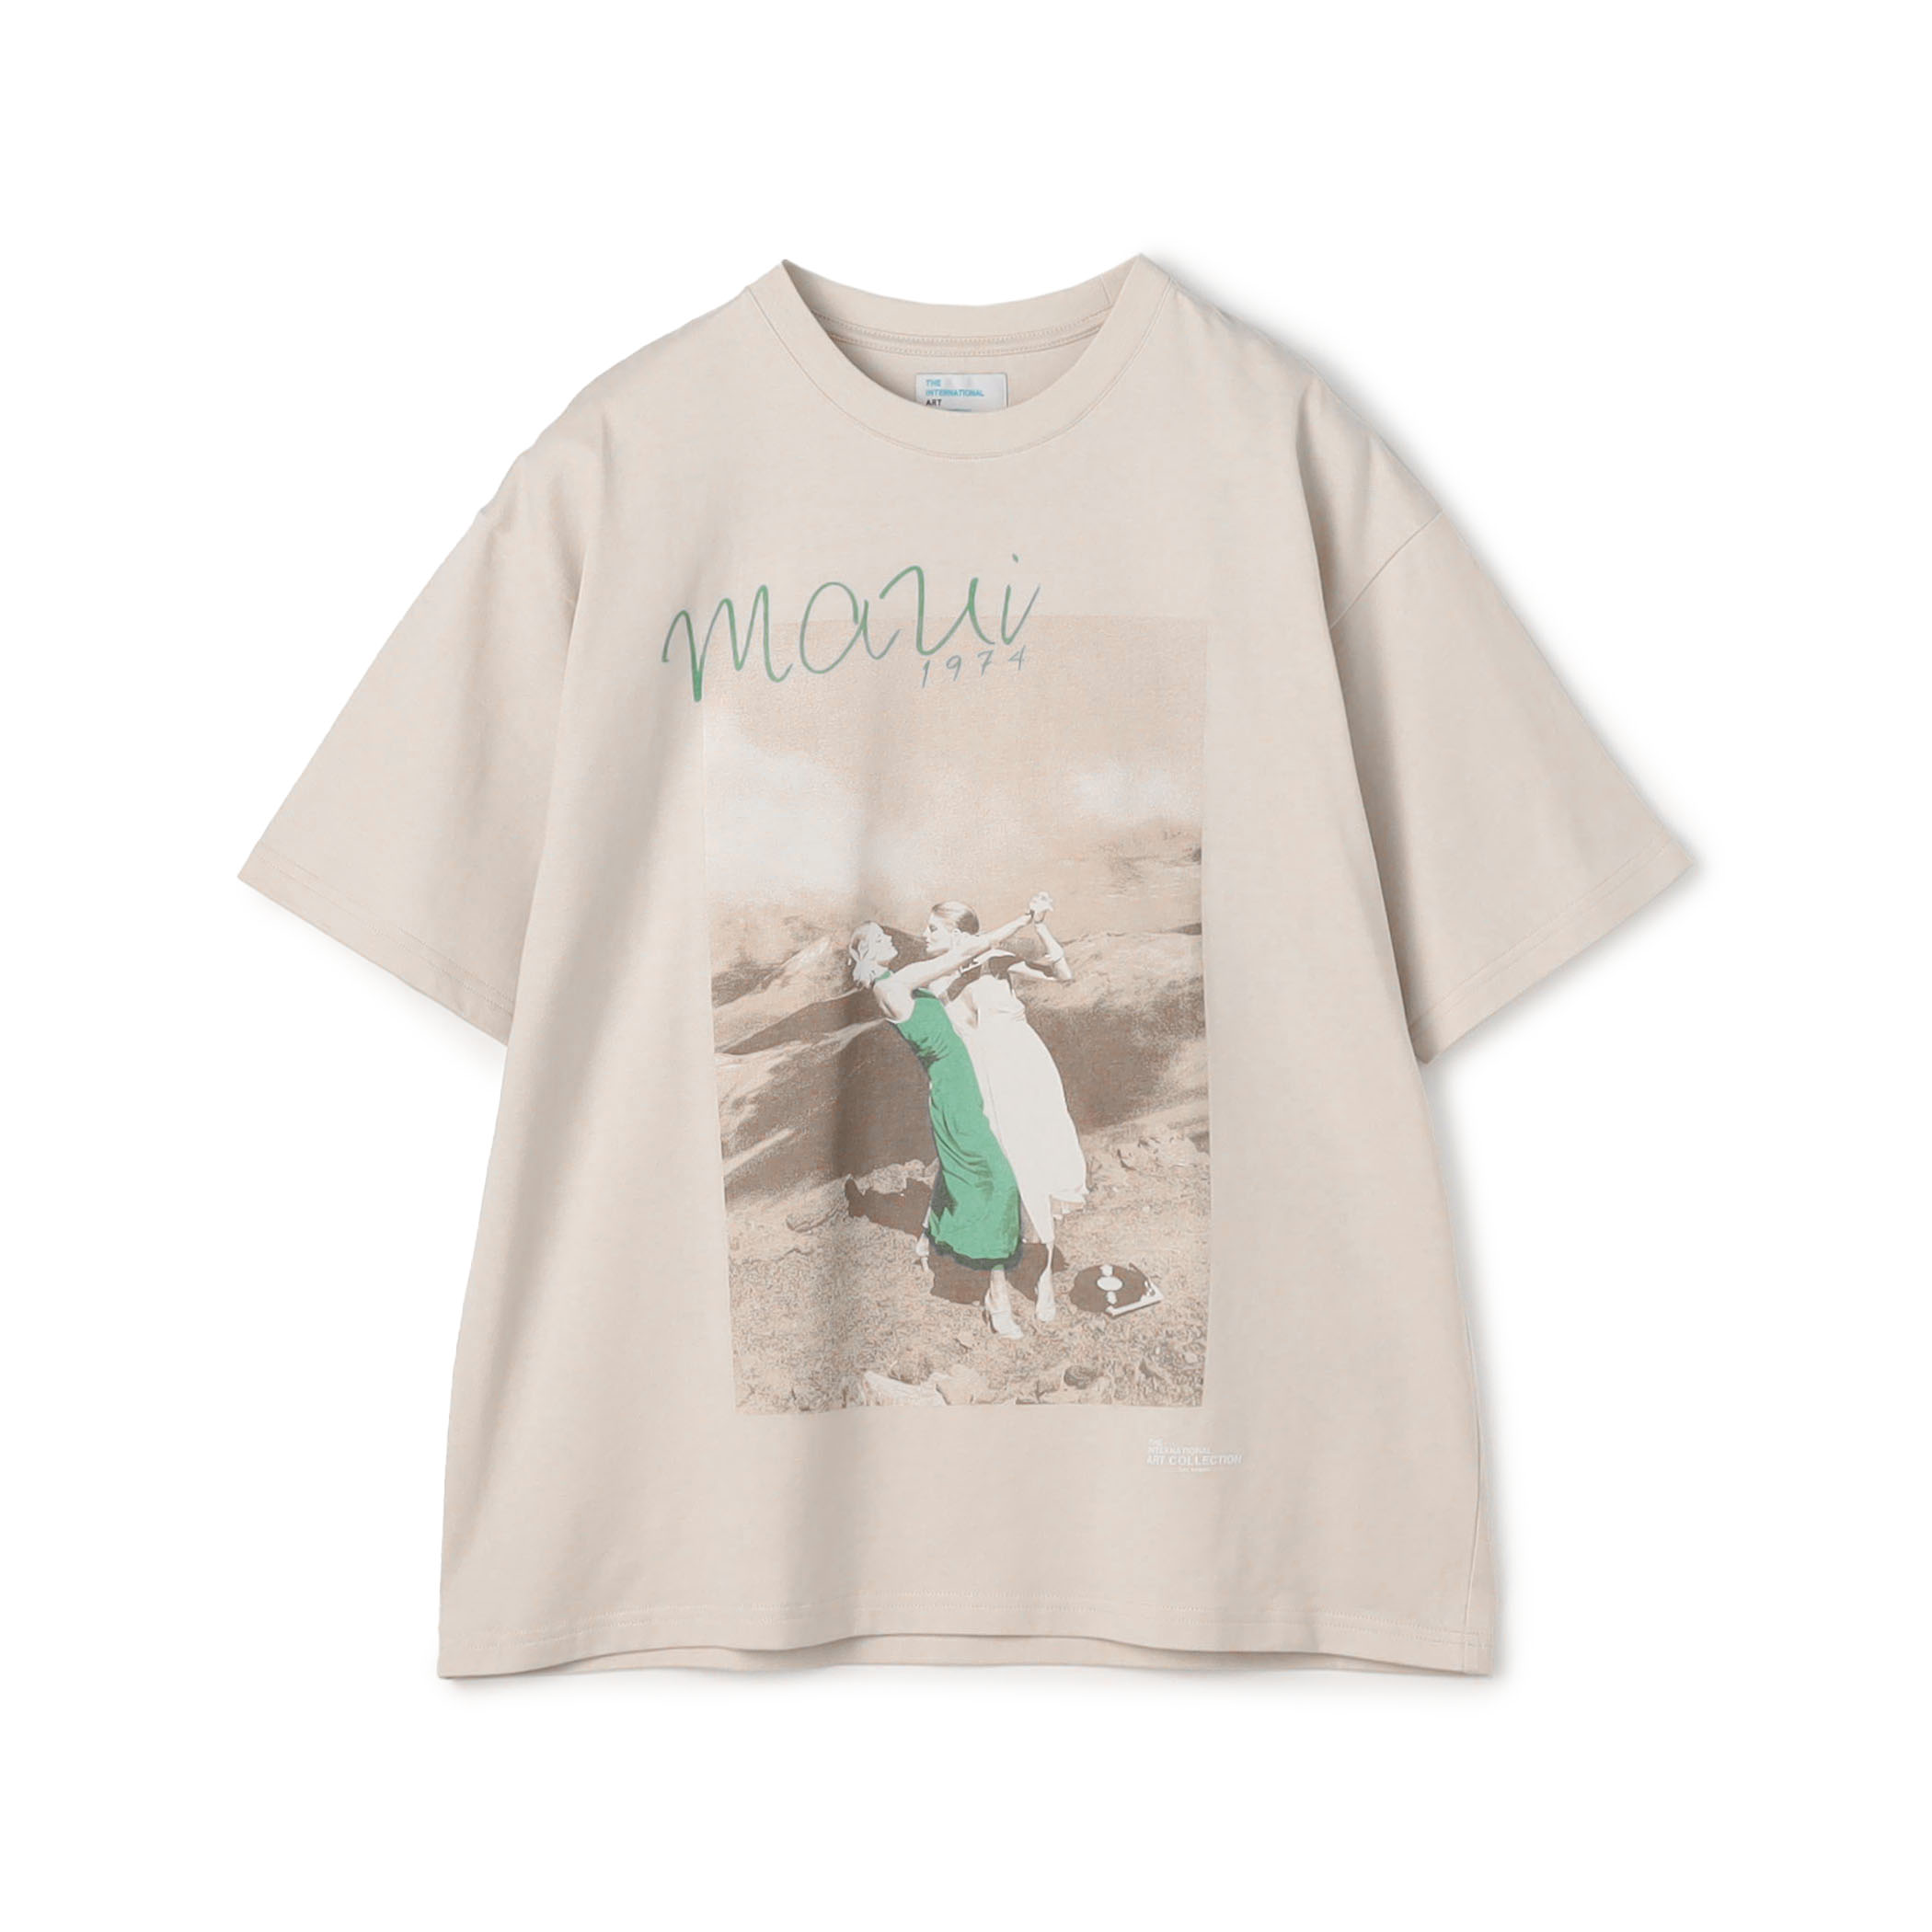 THE INTERNATIONAL IMAGES COLLECTION コットン Tシャツ